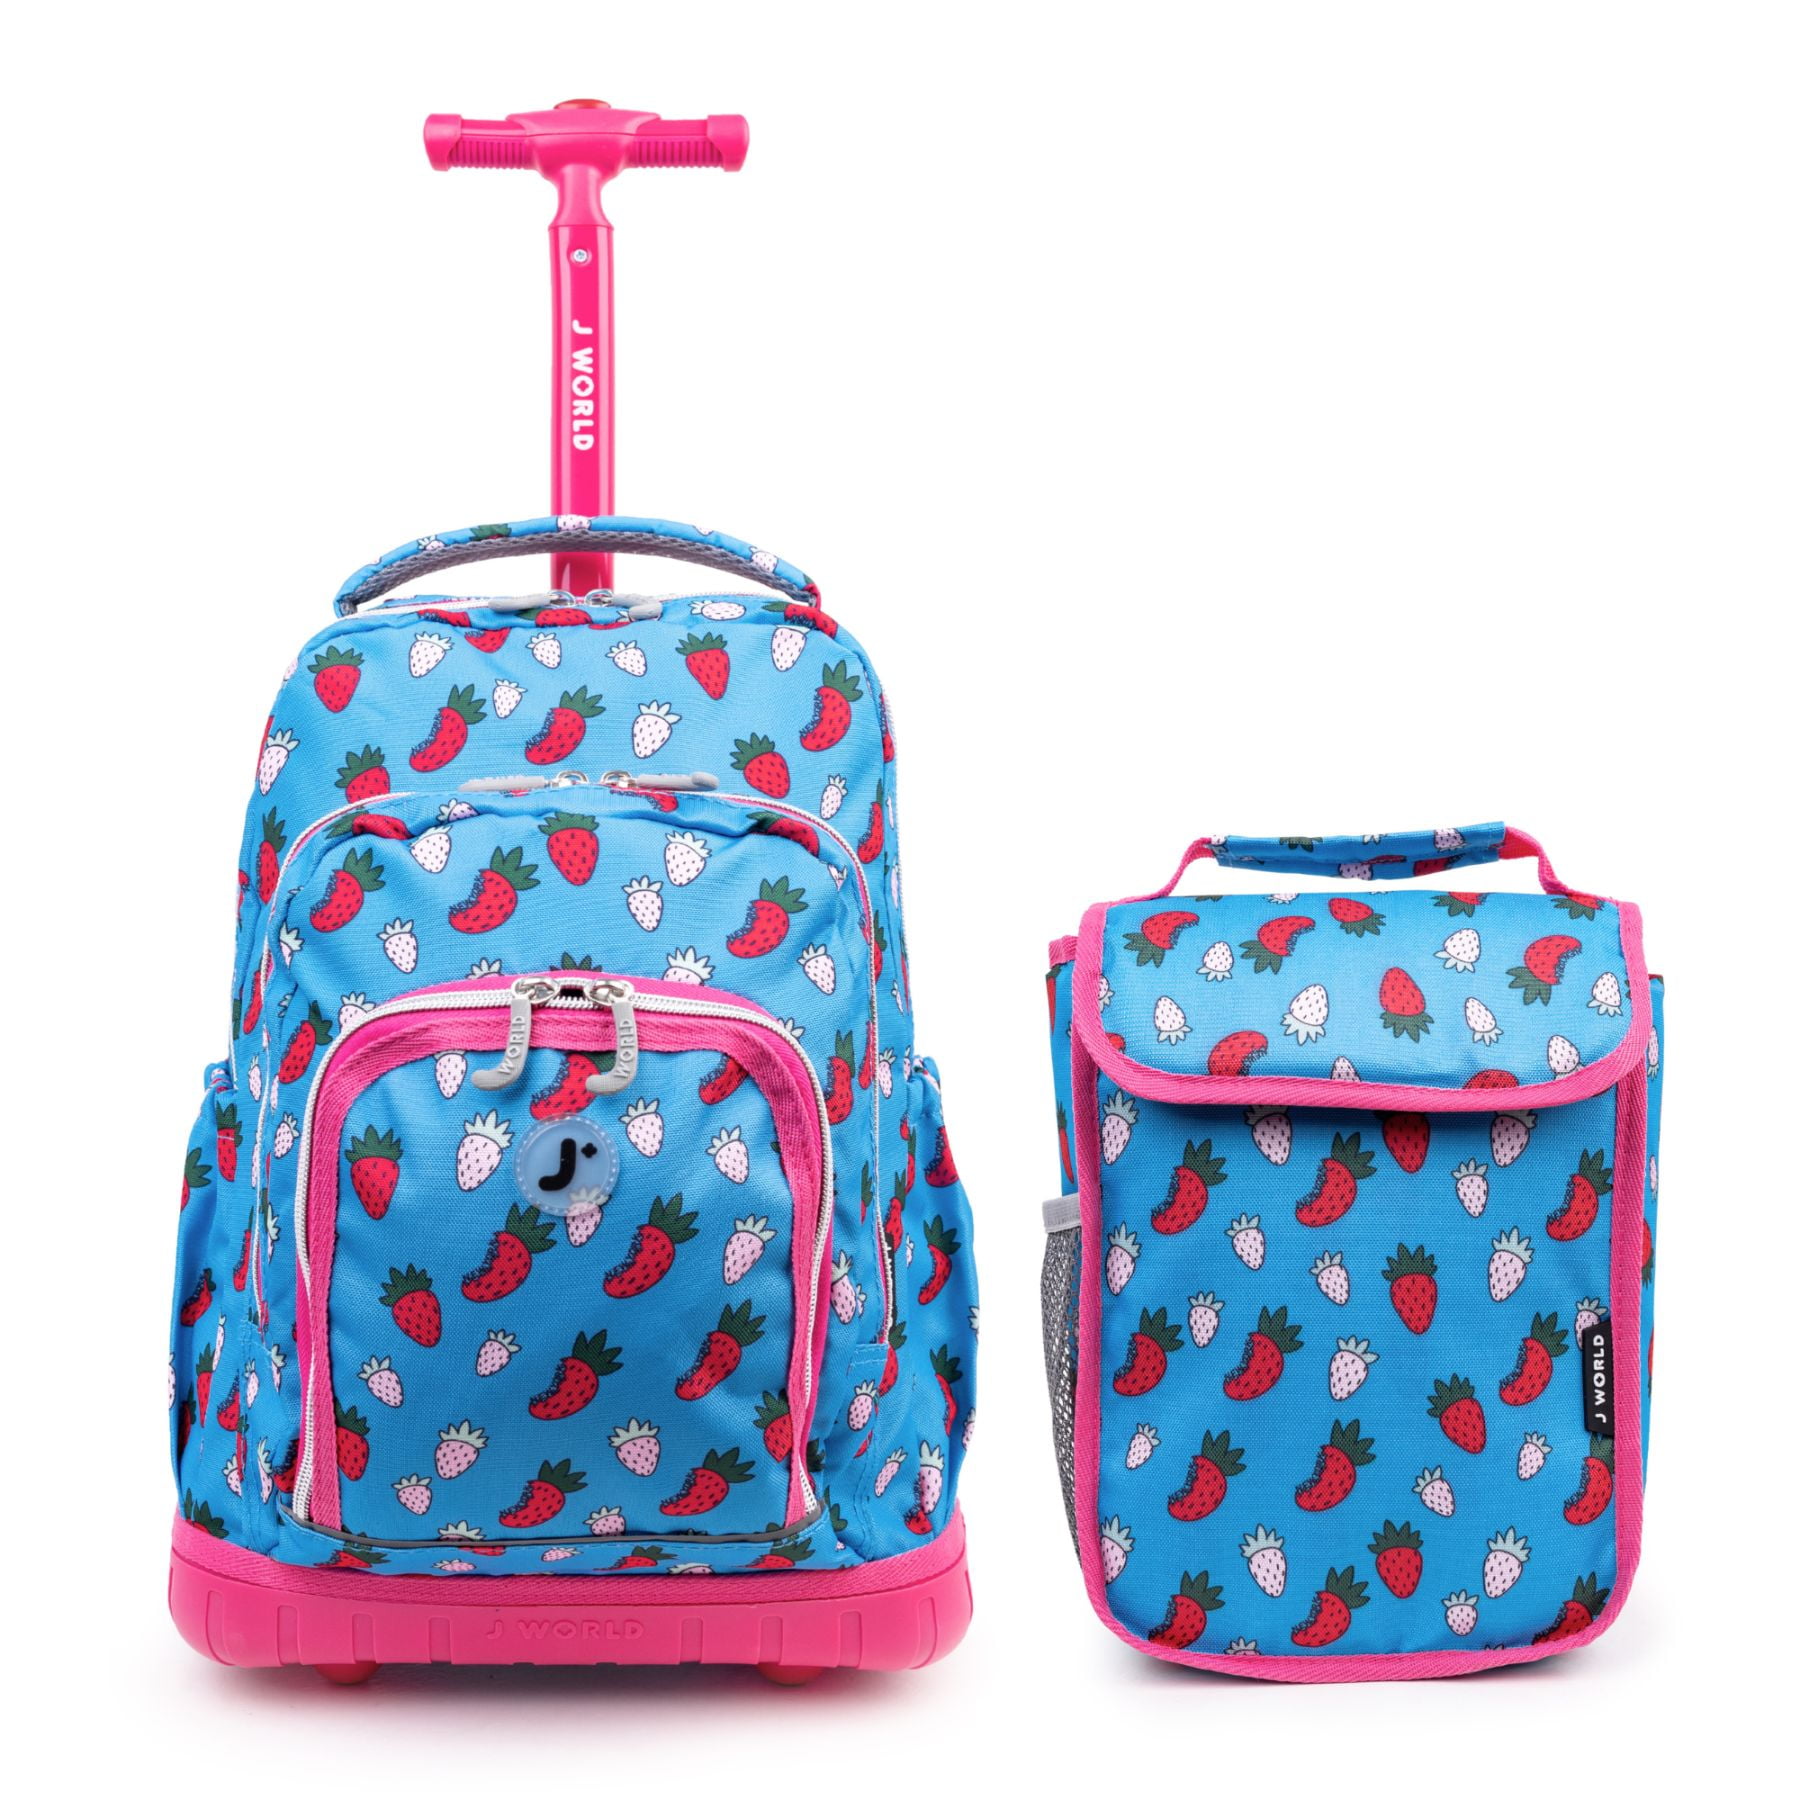 Ready, Set, Go! - Kids' Duffle Bags for Active Kids - JWorldstore